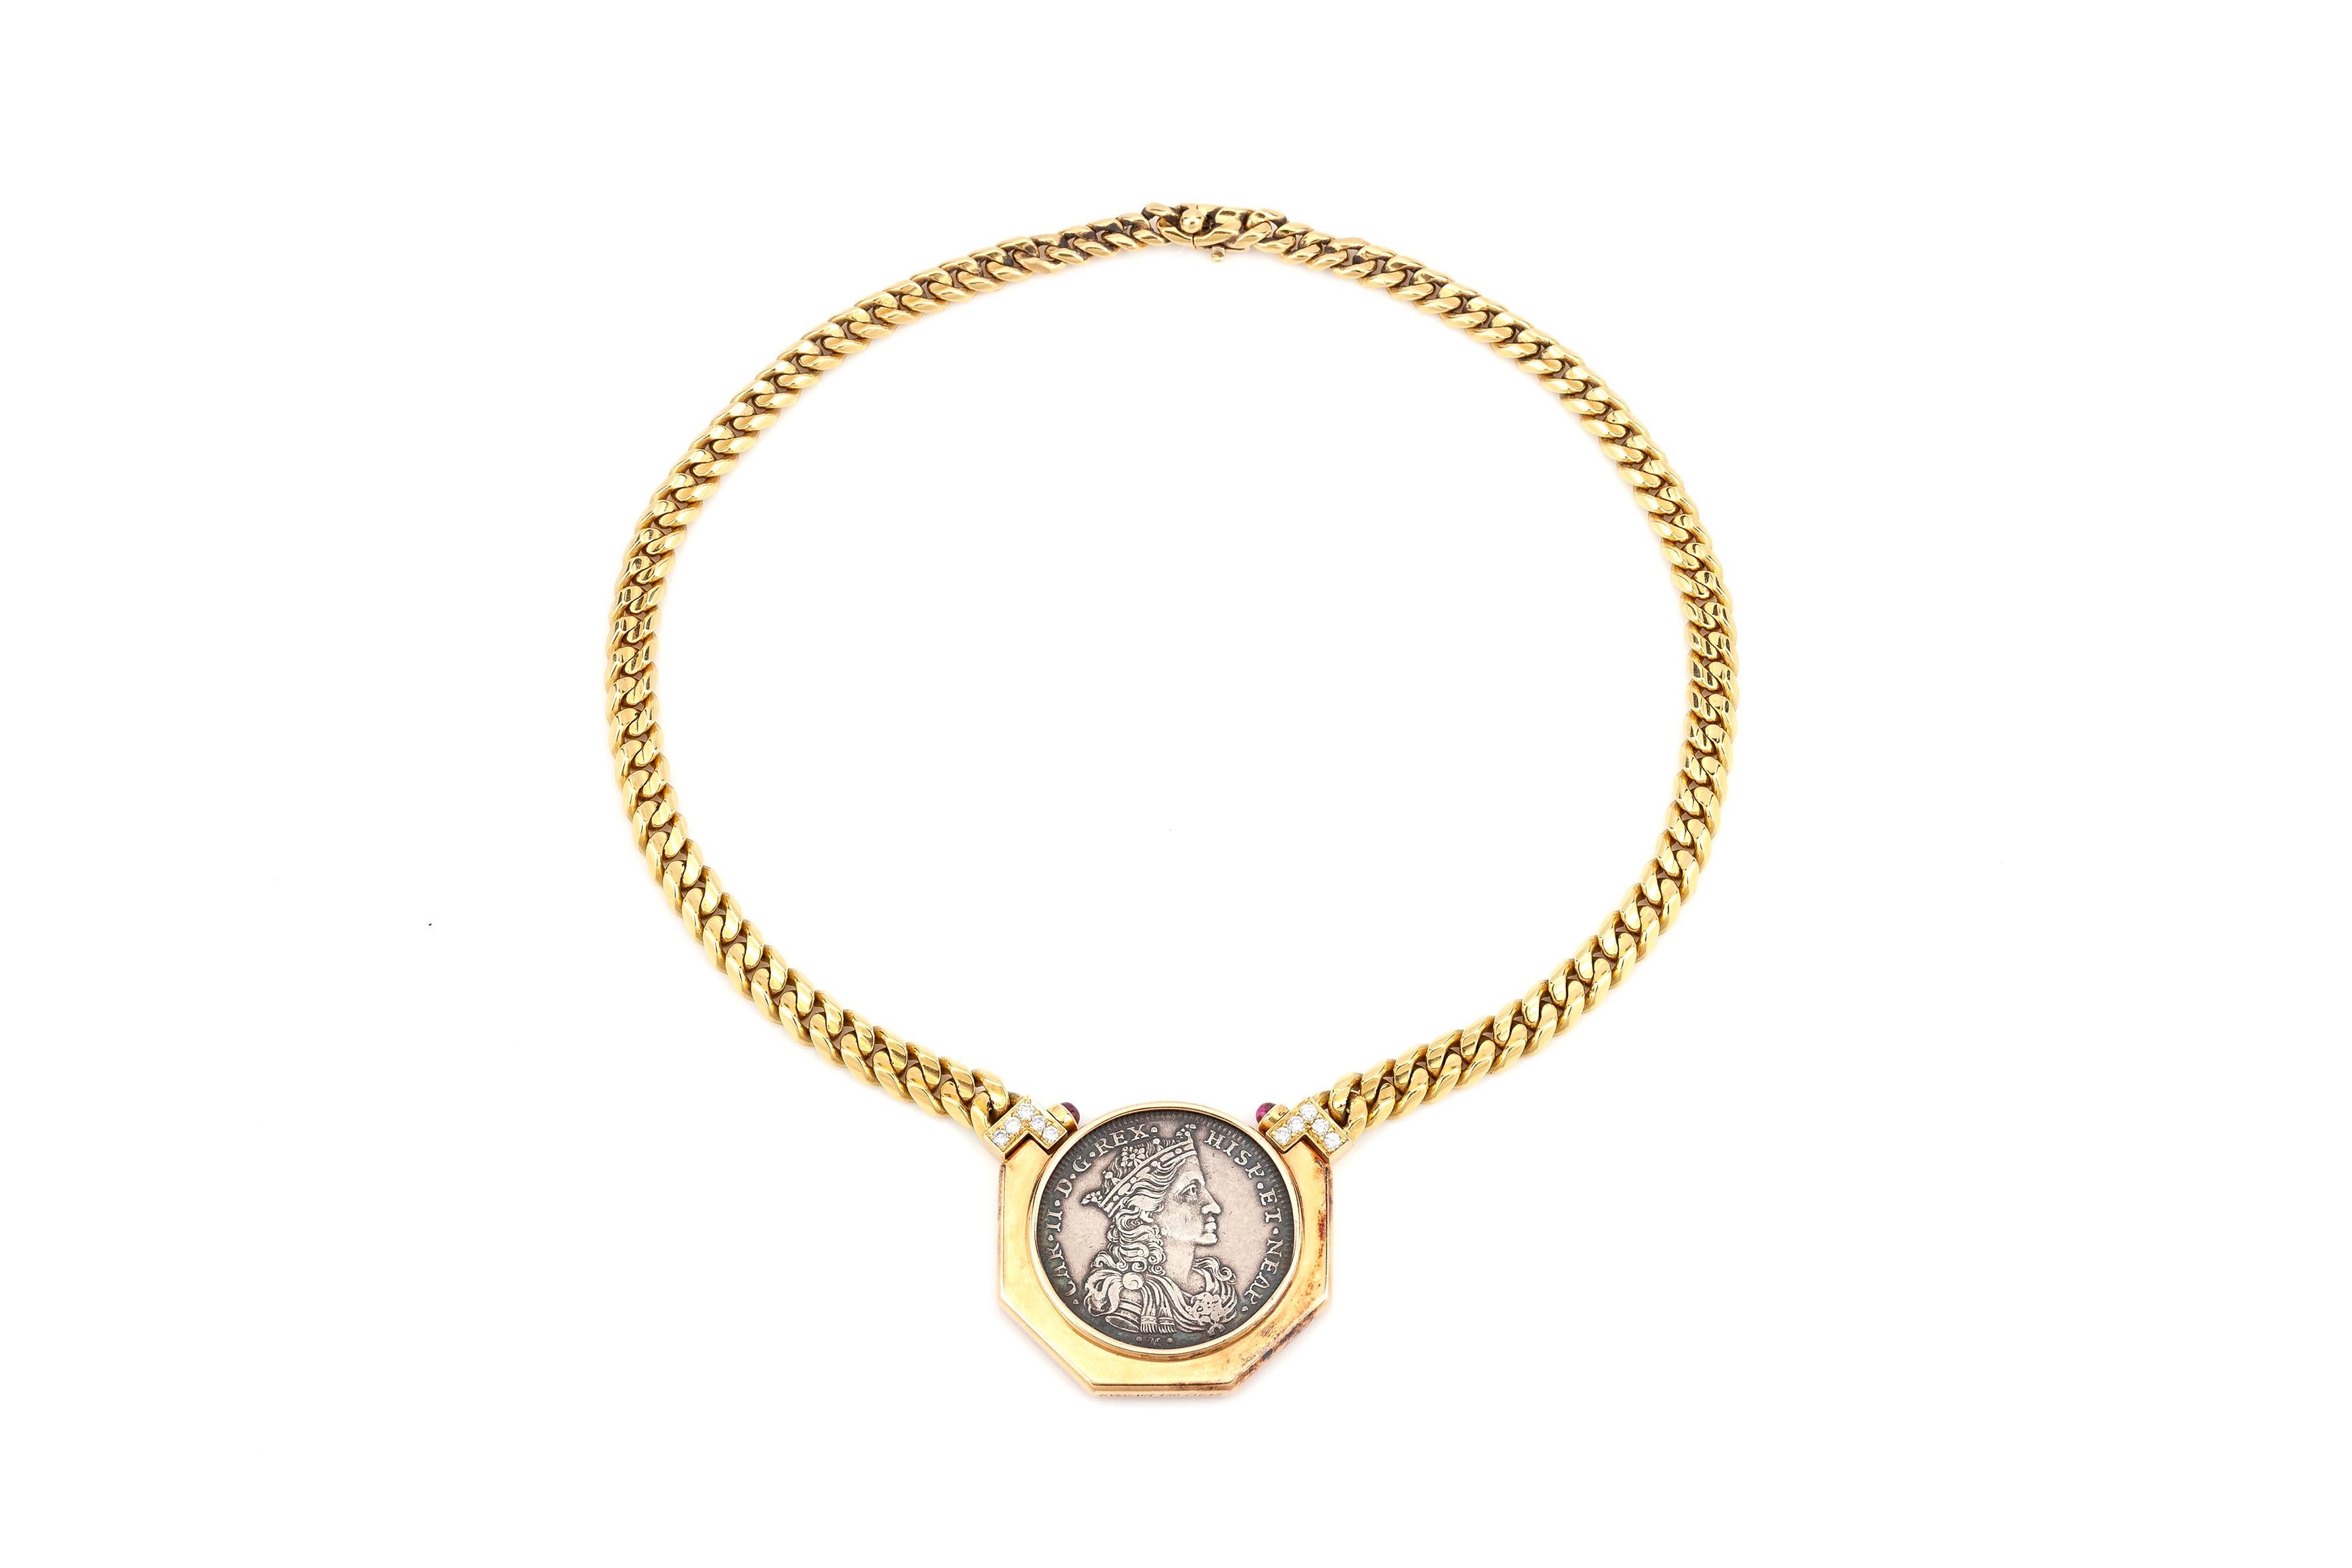 The necklace is finely crafted in 18k yellow gold with coin pendant,

Sign Bvlgari